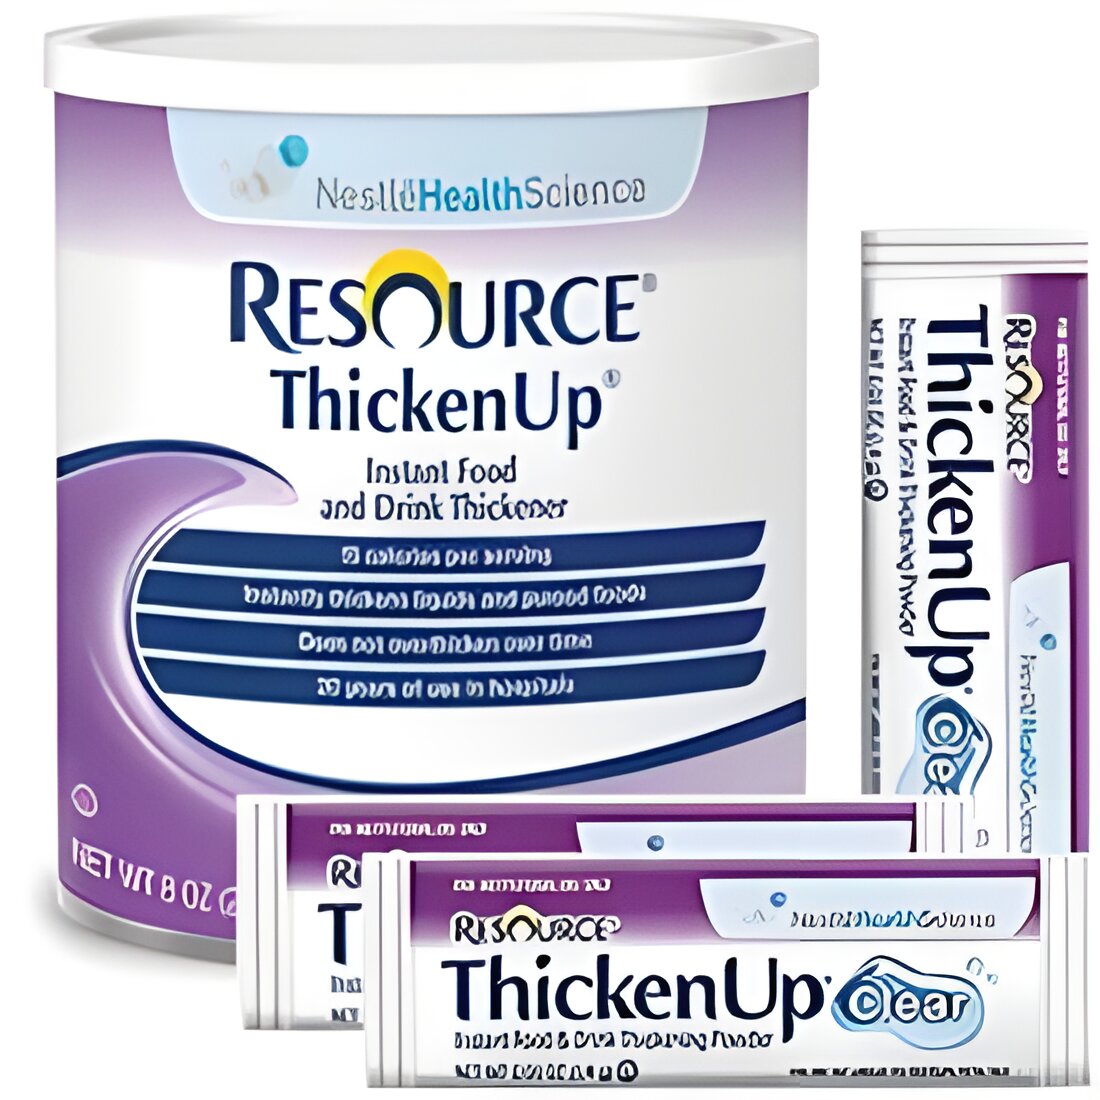 Free Resource ThickenUp Clear Stick Packs